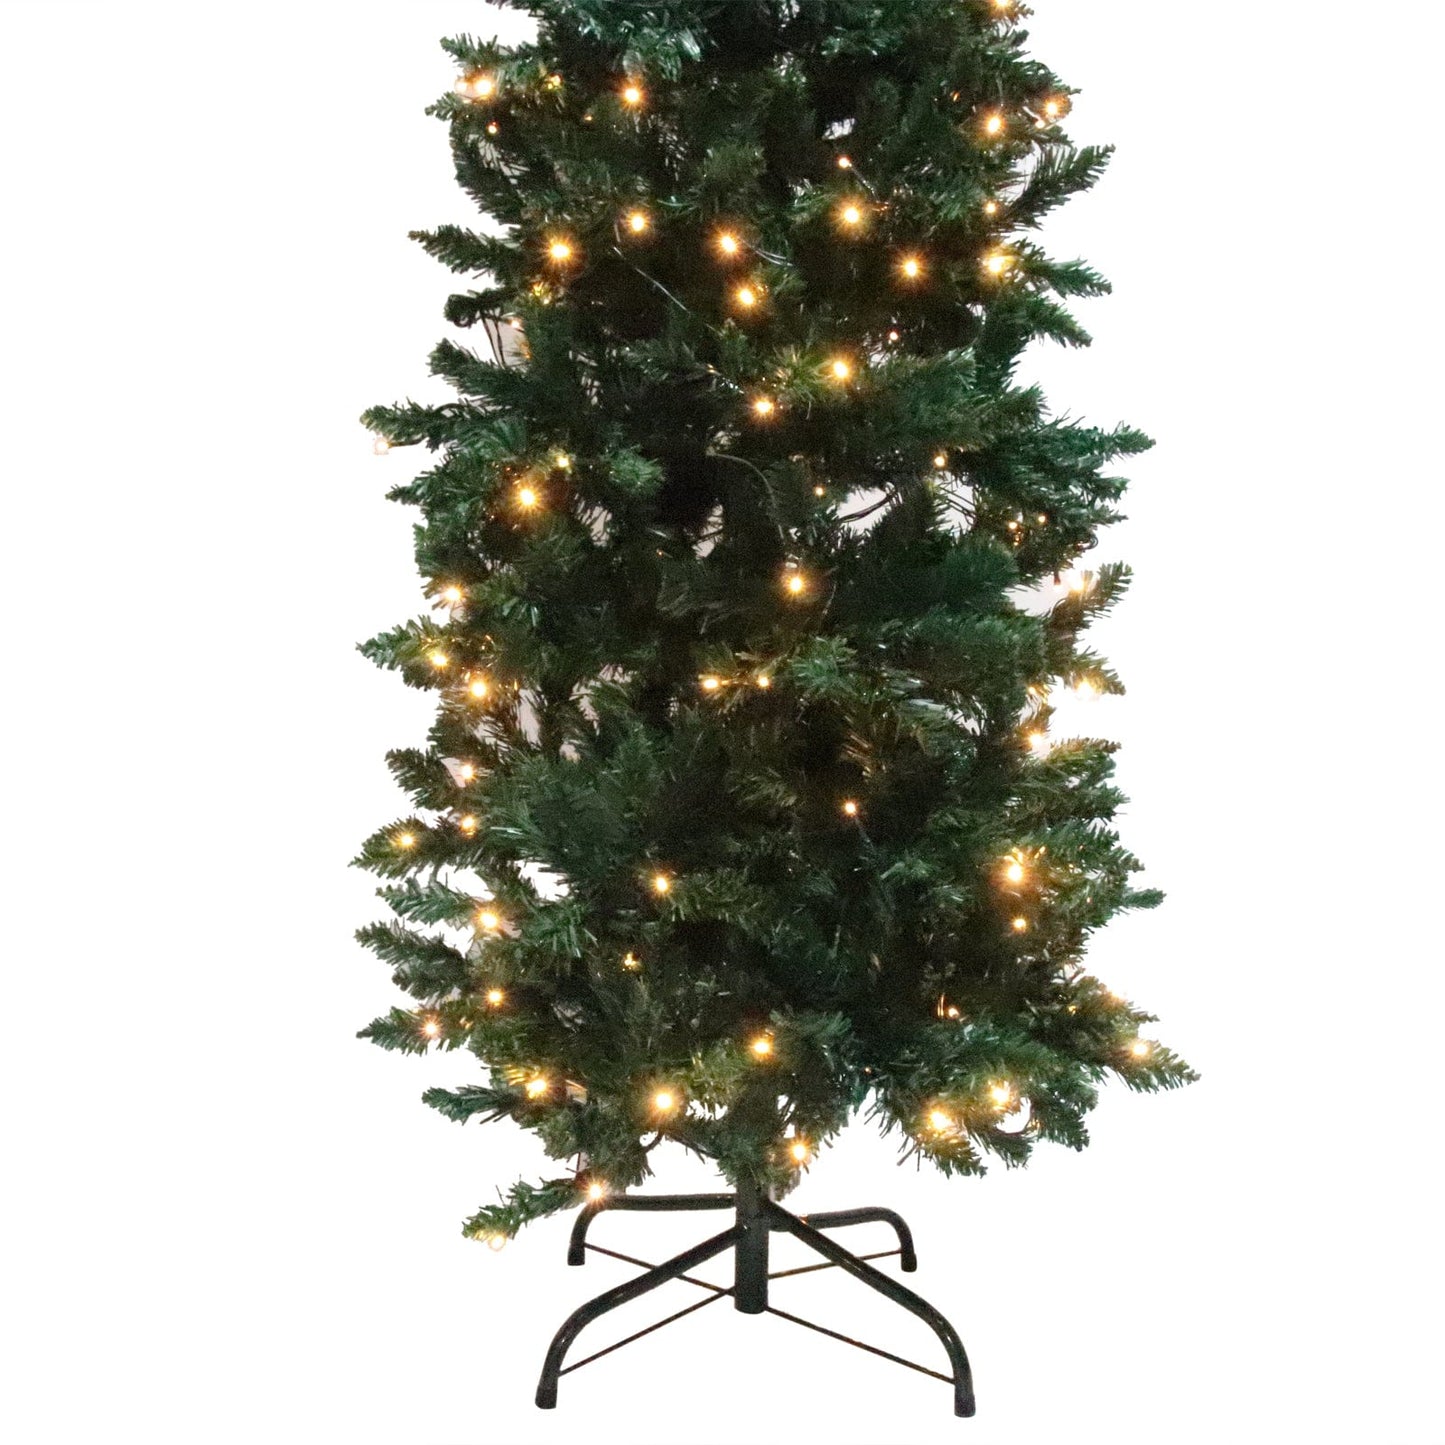 Pencil Christmas Tree with Lights - 6.5ft - HomeRelaxOfficial